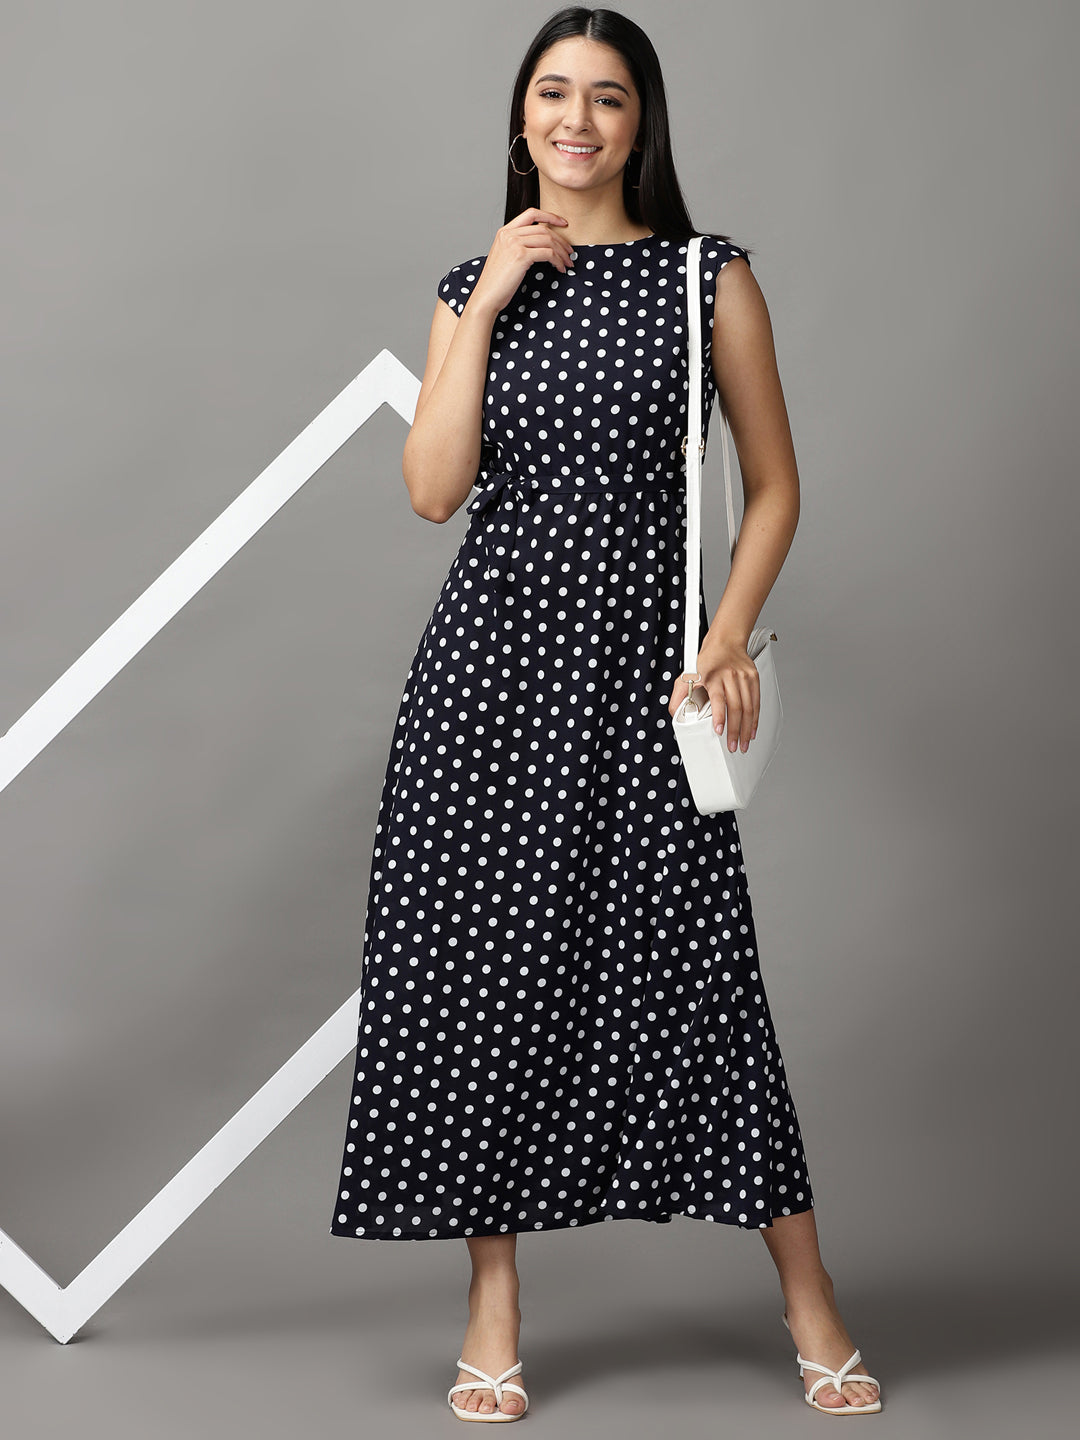 Women's Blue Polka Dots Fit and Flare Dress